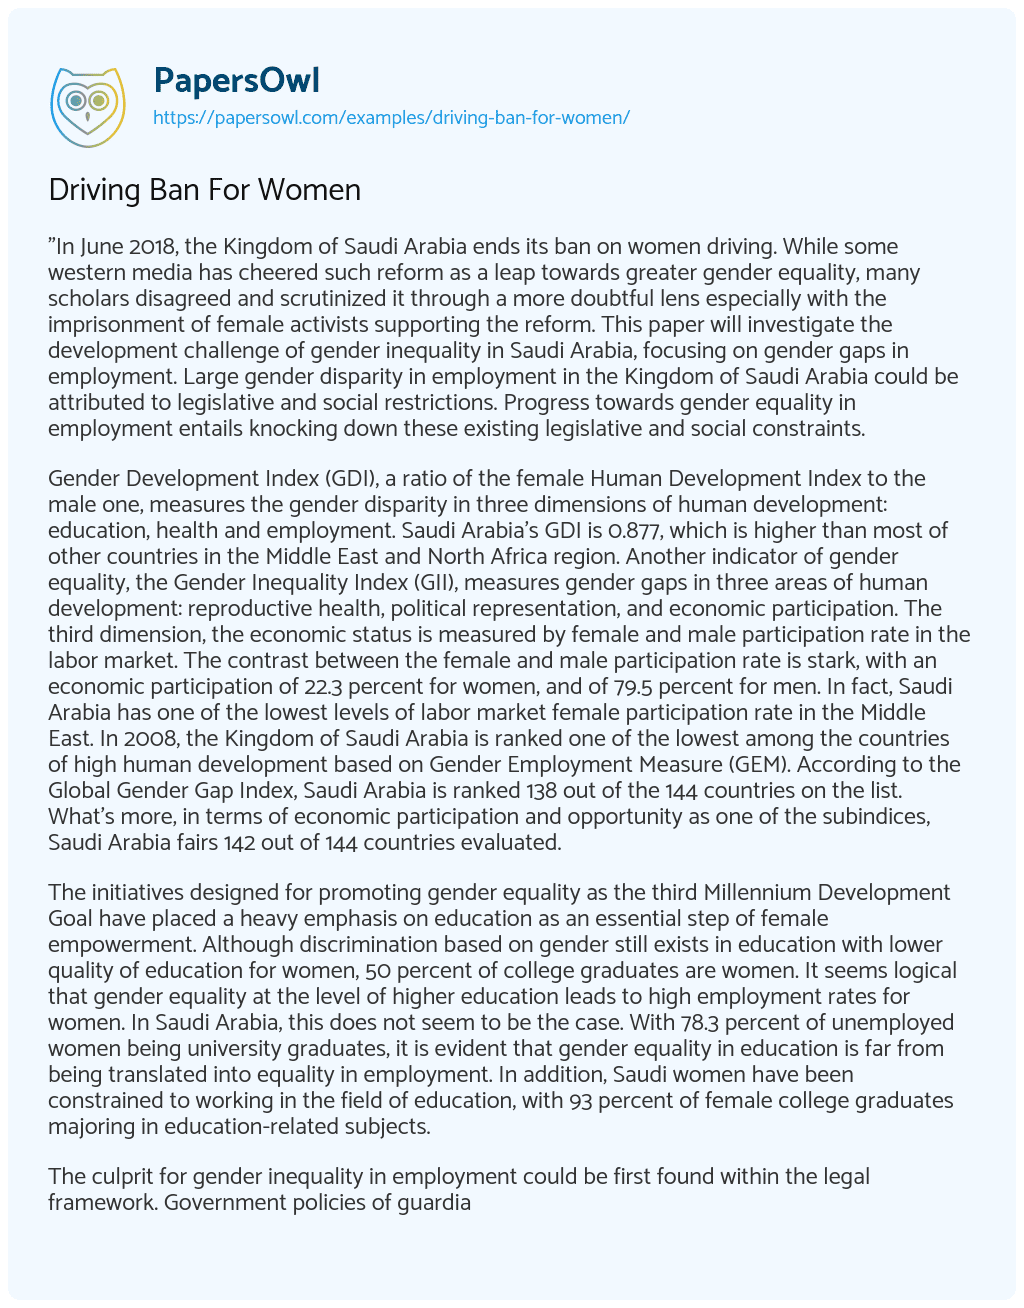 Essay on Driving Ban for Women